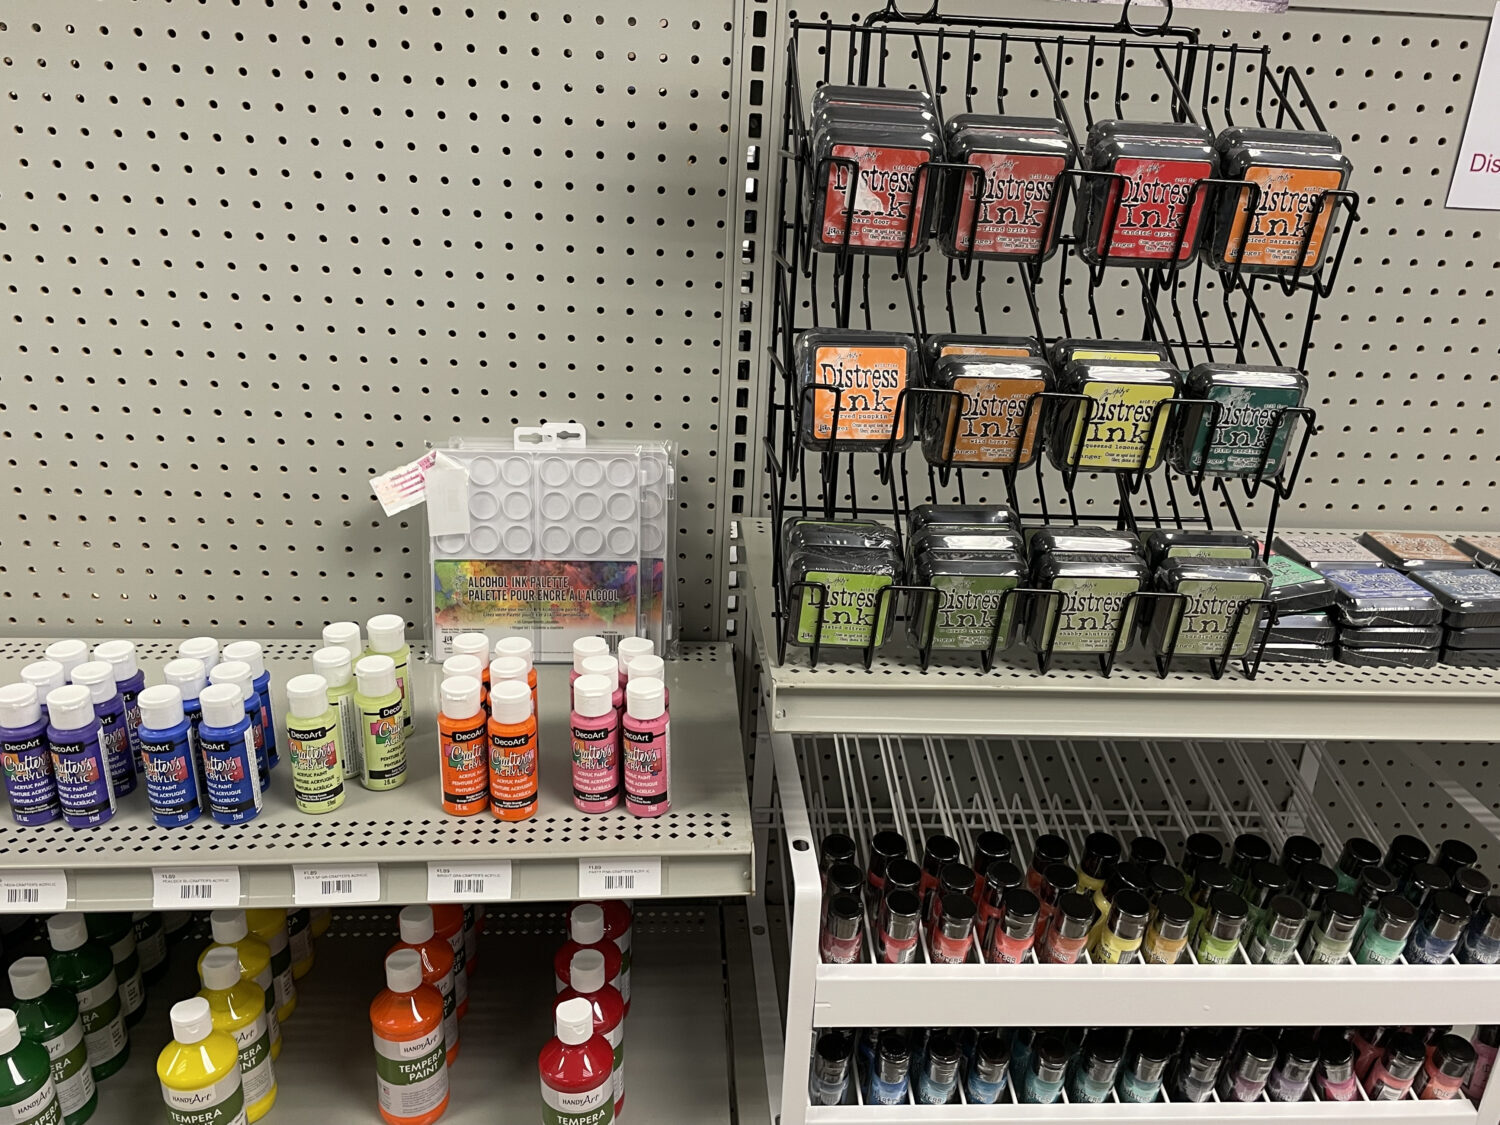 Crafter's Collection Acrylic Craft Paint, Hobby Lobby